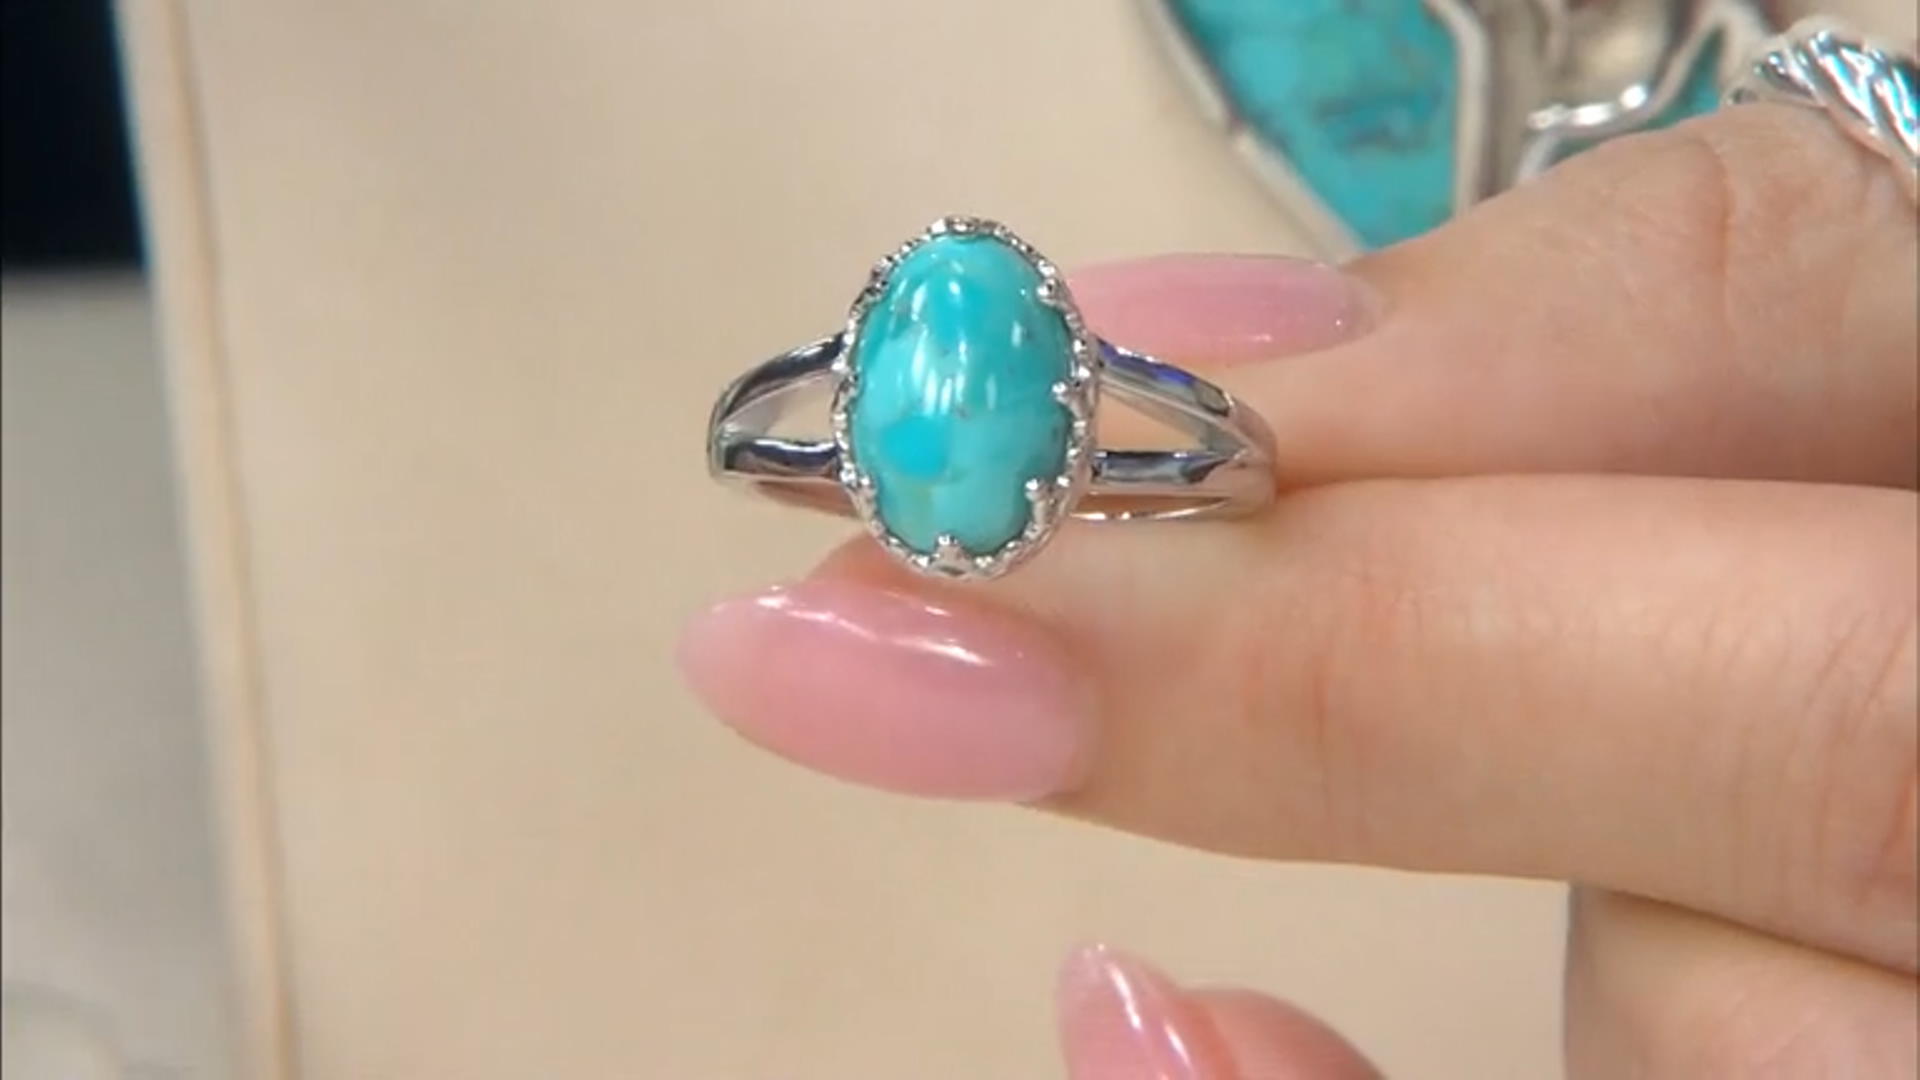 Blue Turquoise Platinum Over Sterling Silver Solitaire Ring Video Thumbnail